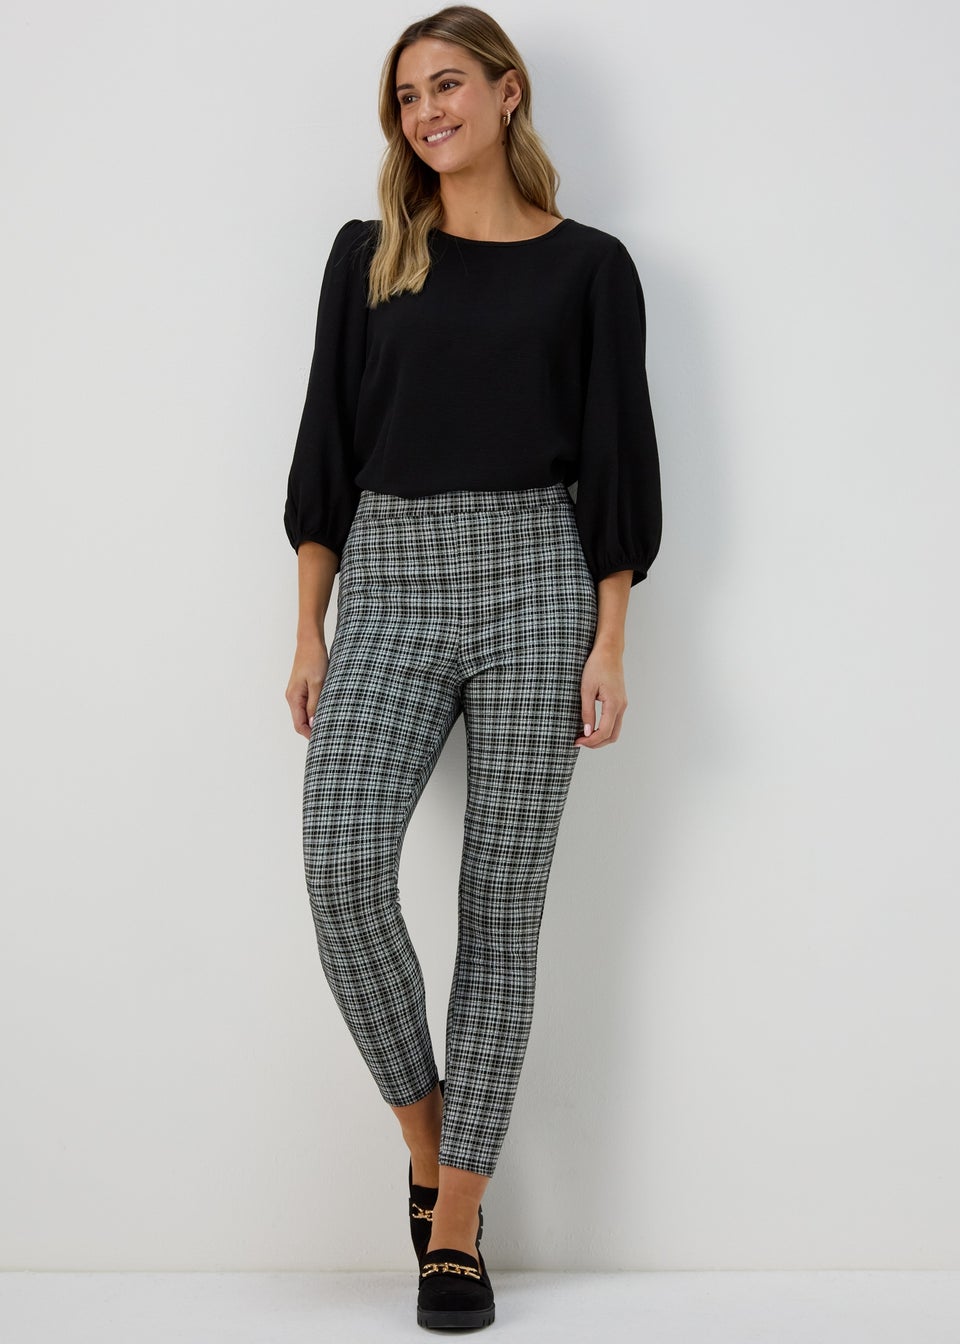 Black & White Check Textured Trousers